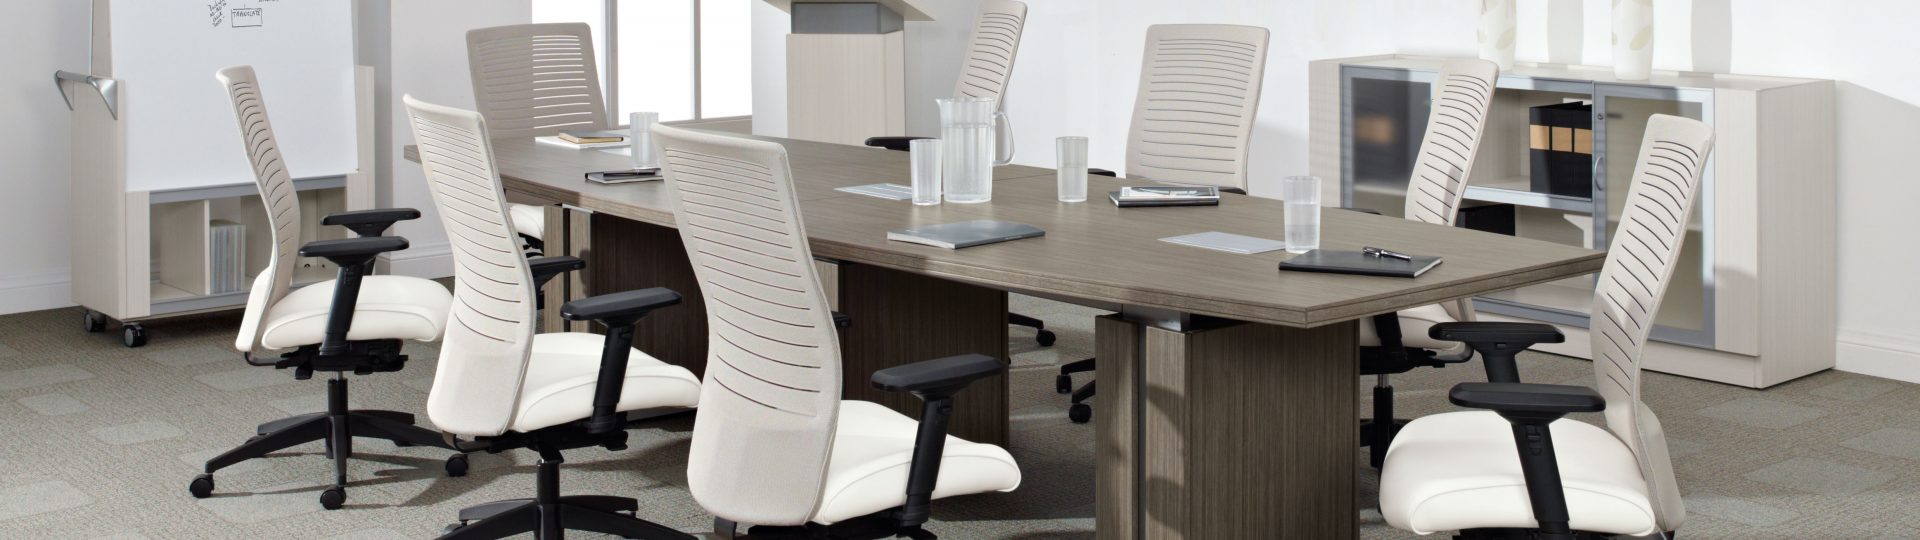 Global Accord Conference chairs and Zira Conference Table